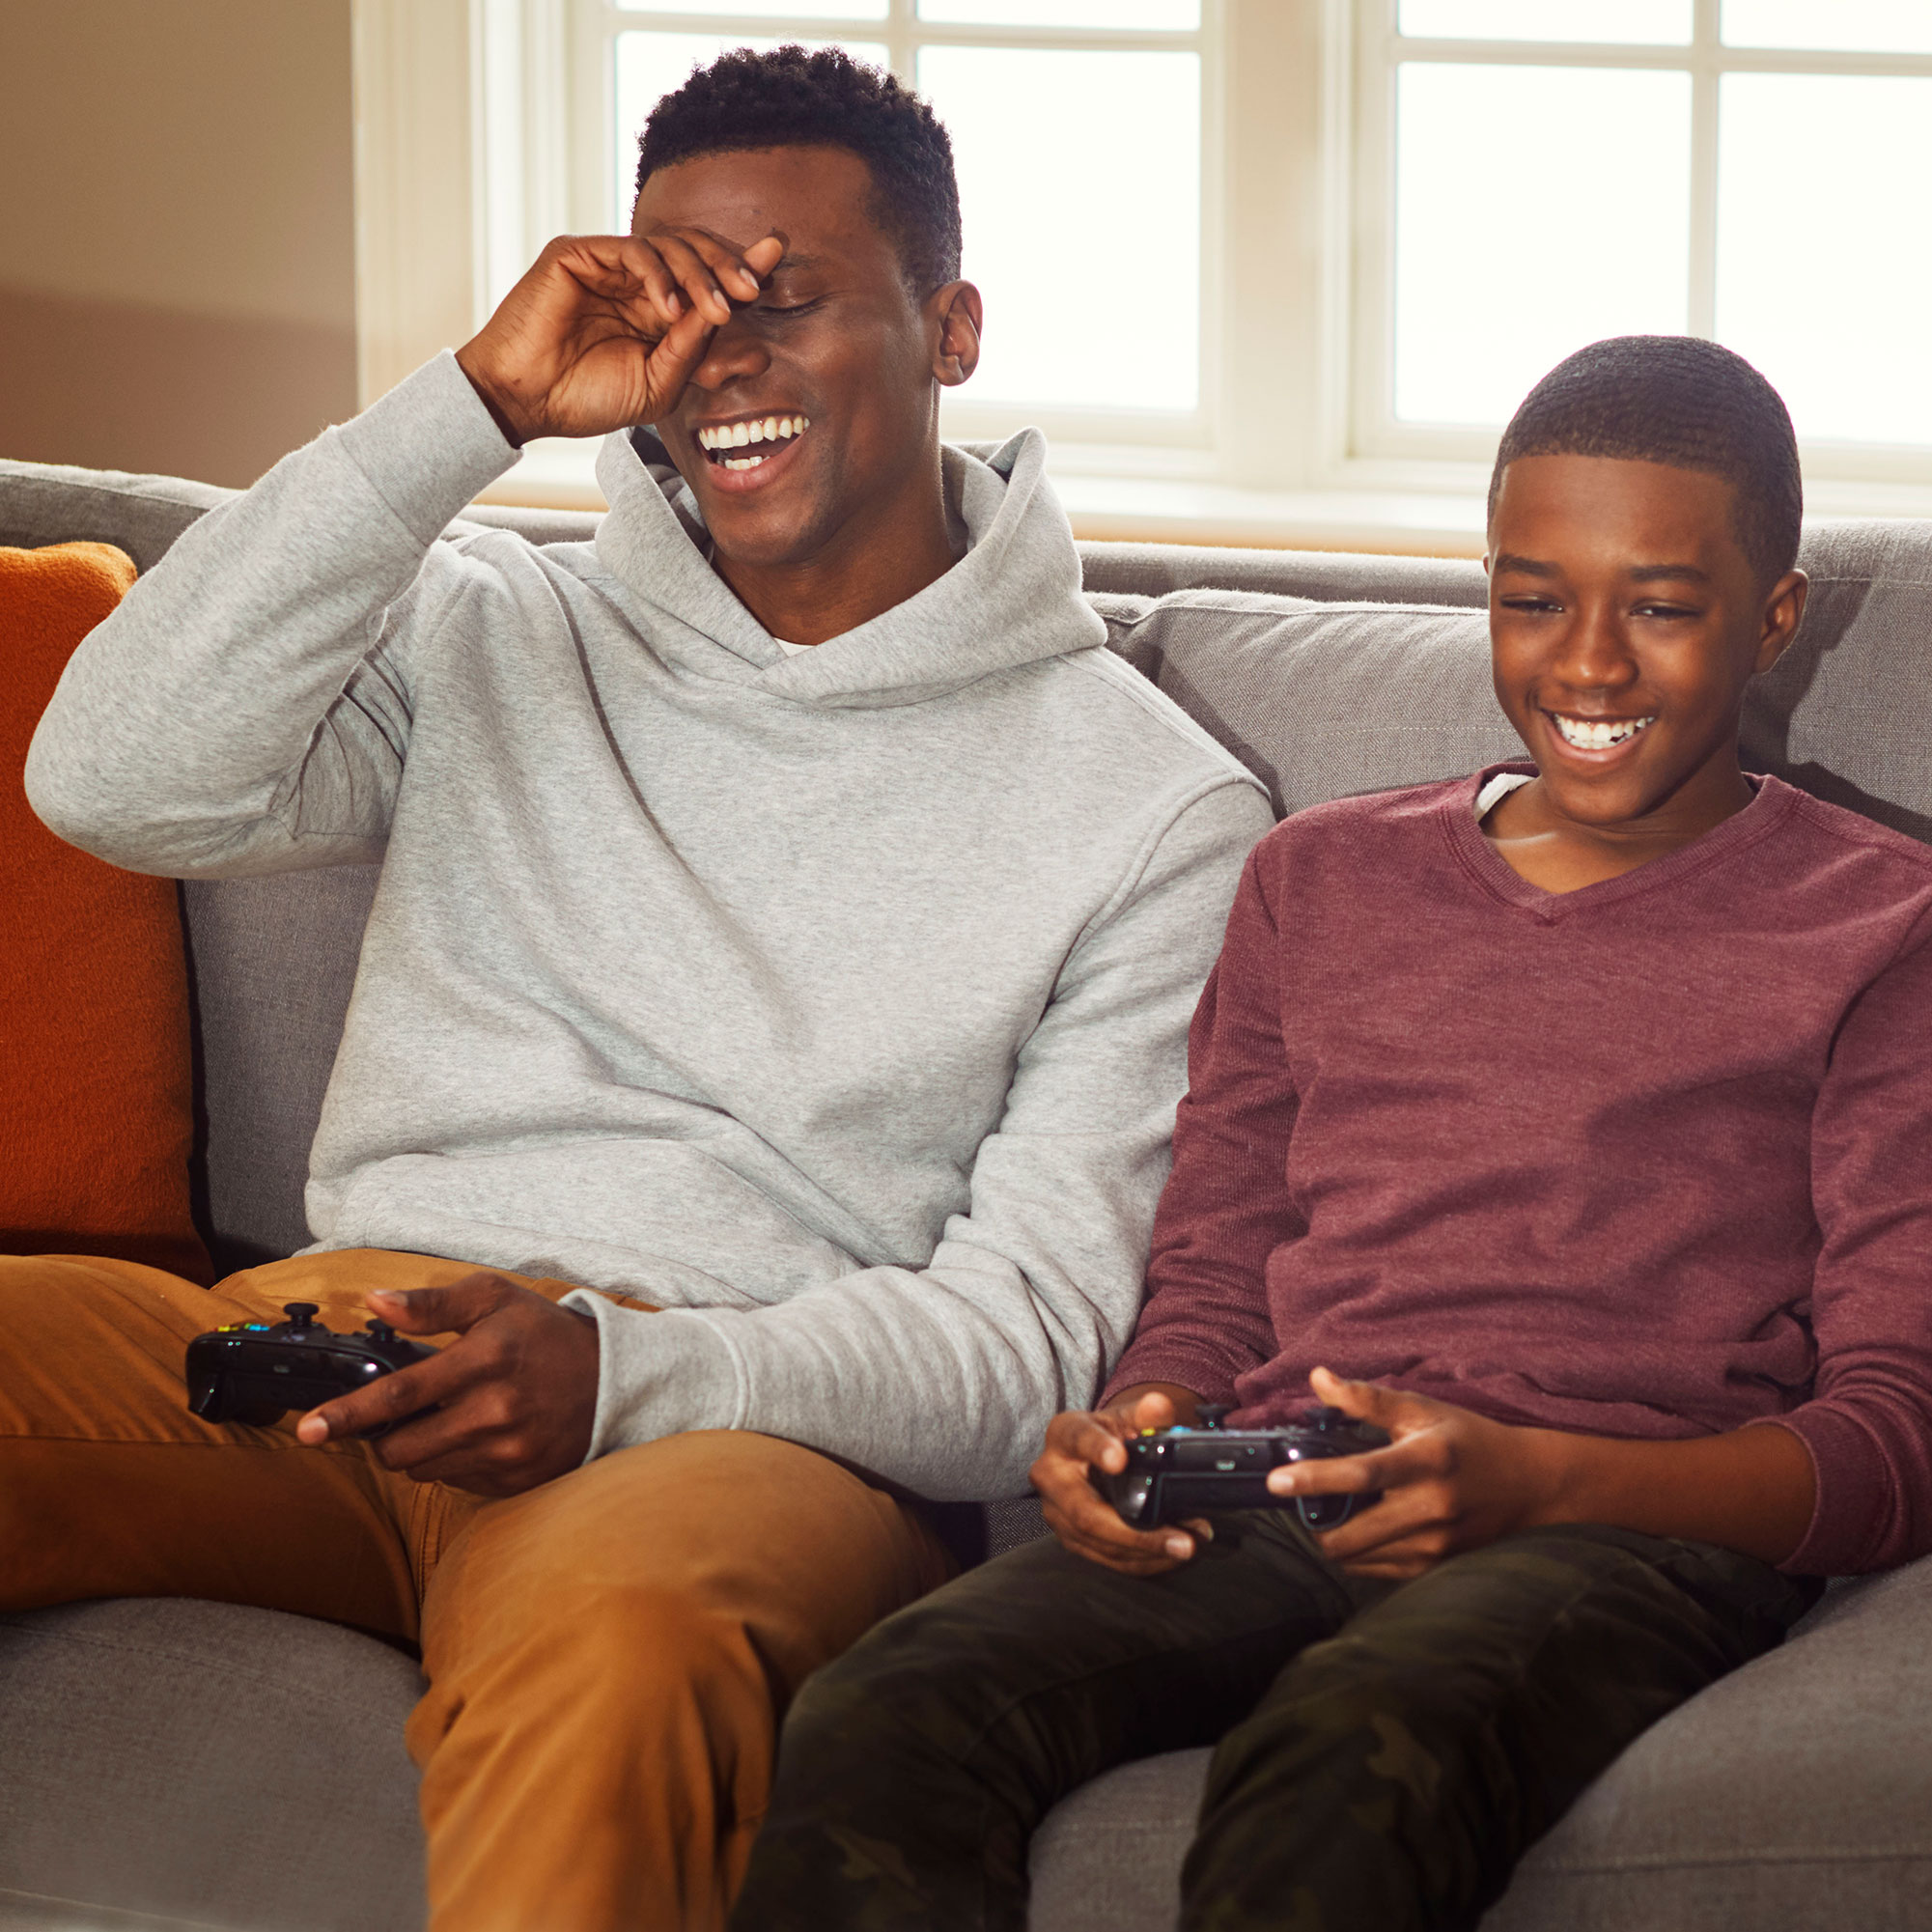 ESRB Family Gaming Guide provides key information to manage kids' gameplay experiences.